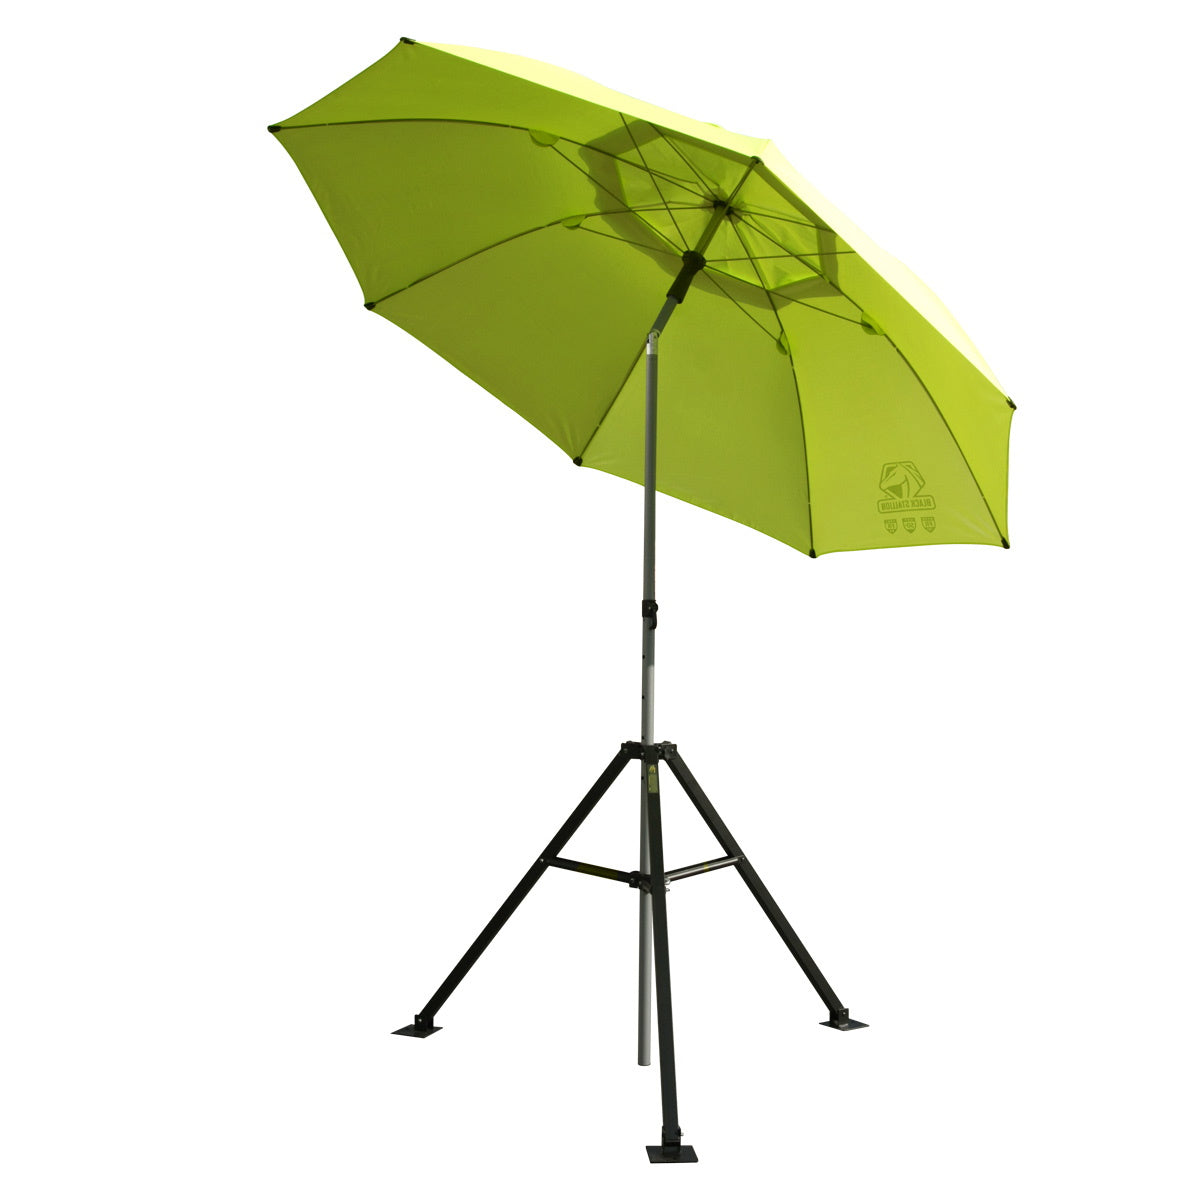 Revco Black Stallion Yellow/Lime FR Industrial Umbrella w/out Stand (UB200-YEL)